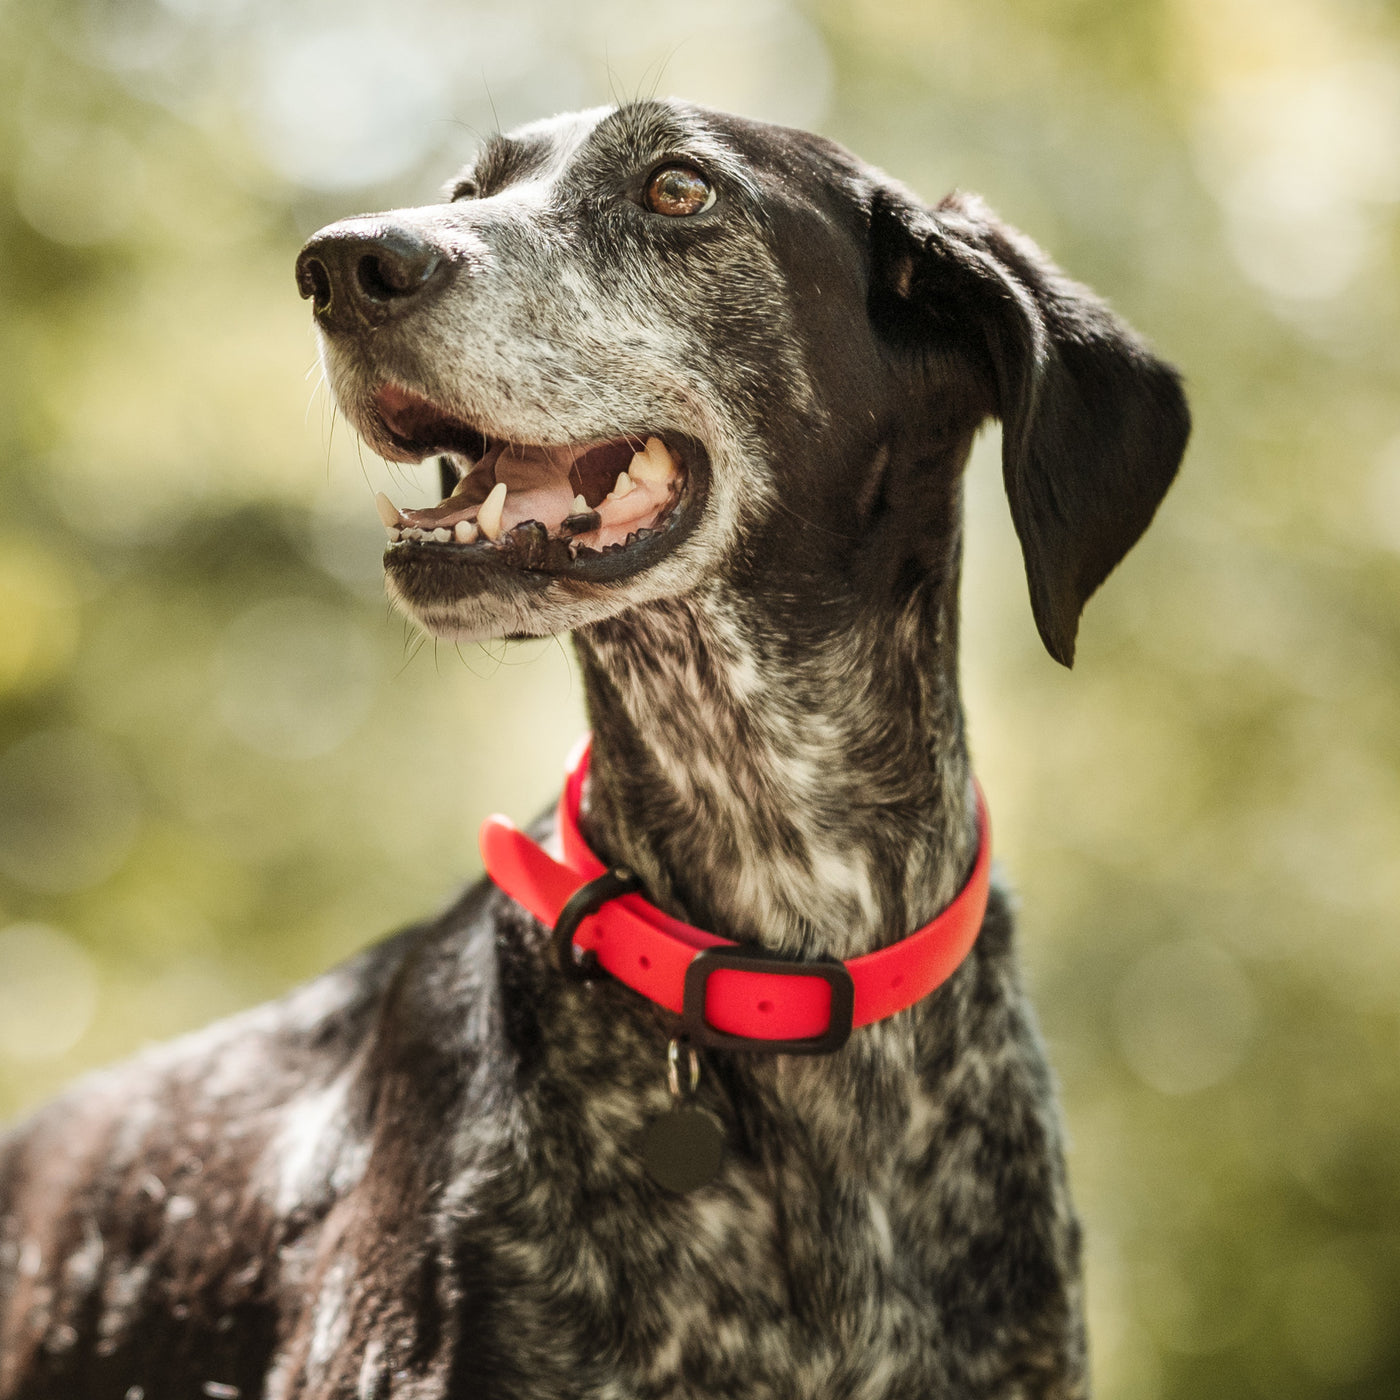 NUVUQ - Waterproof and Lightweight Dog Collar - Tomato Red